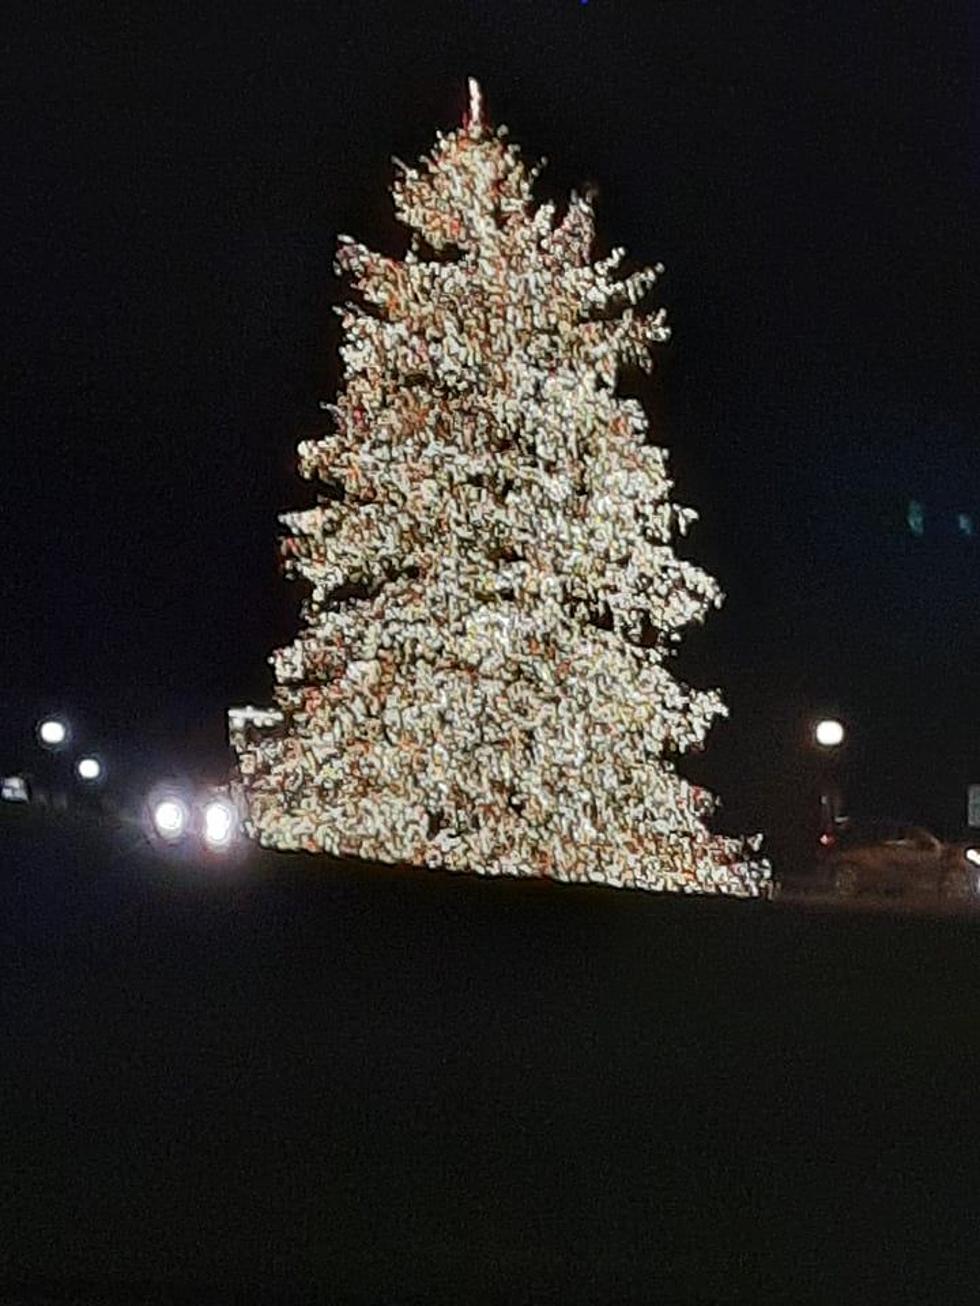 Marist’s Christmas Tree Shines Once Again for 2021